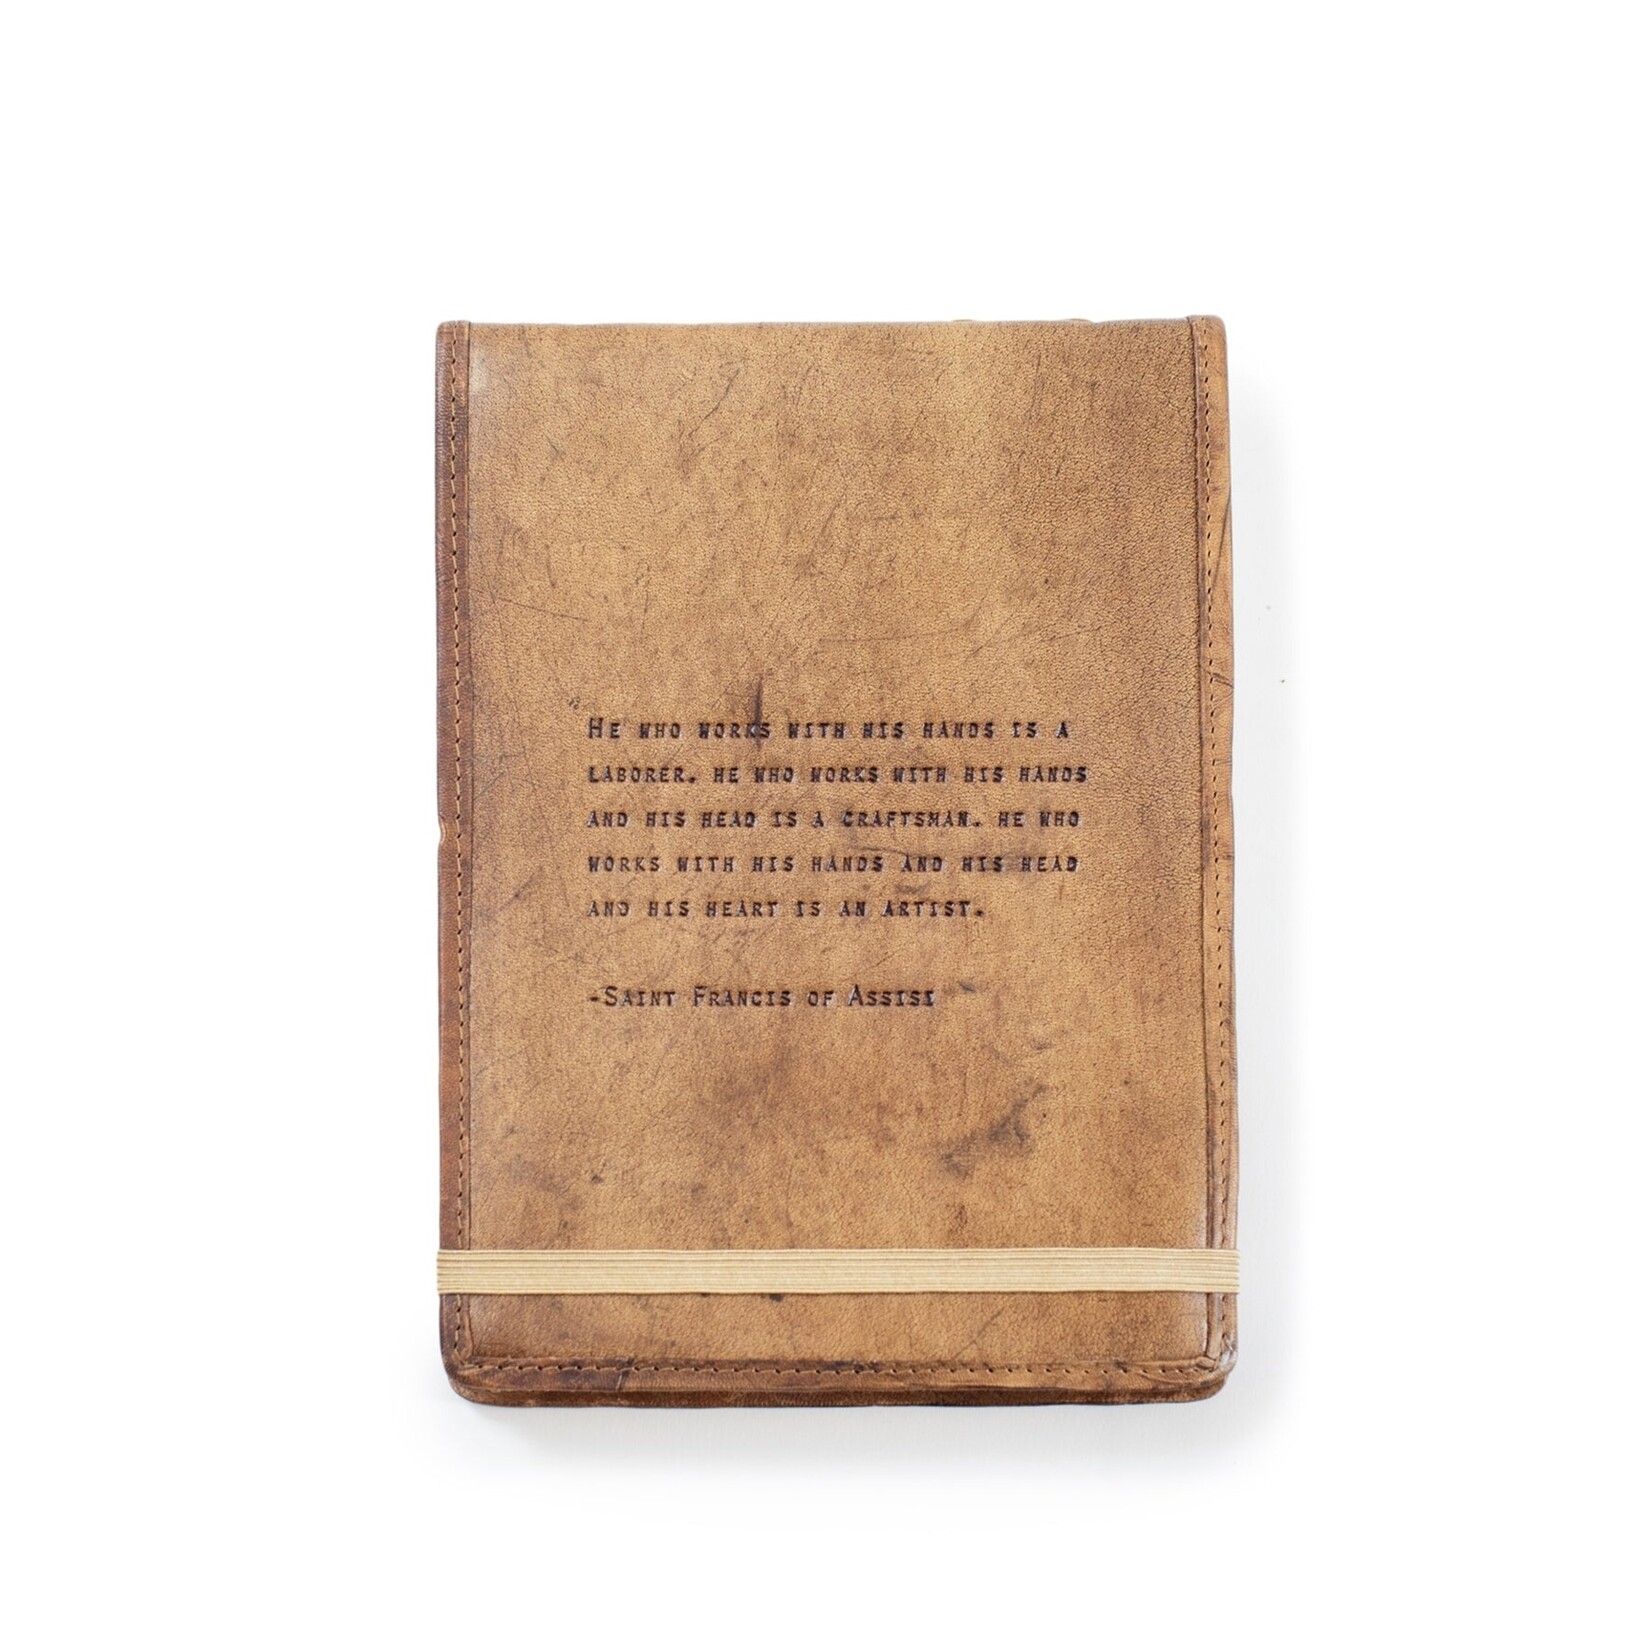 Sugarboo & Co. Sugarboo Large Leather Journal (Various Quotes)